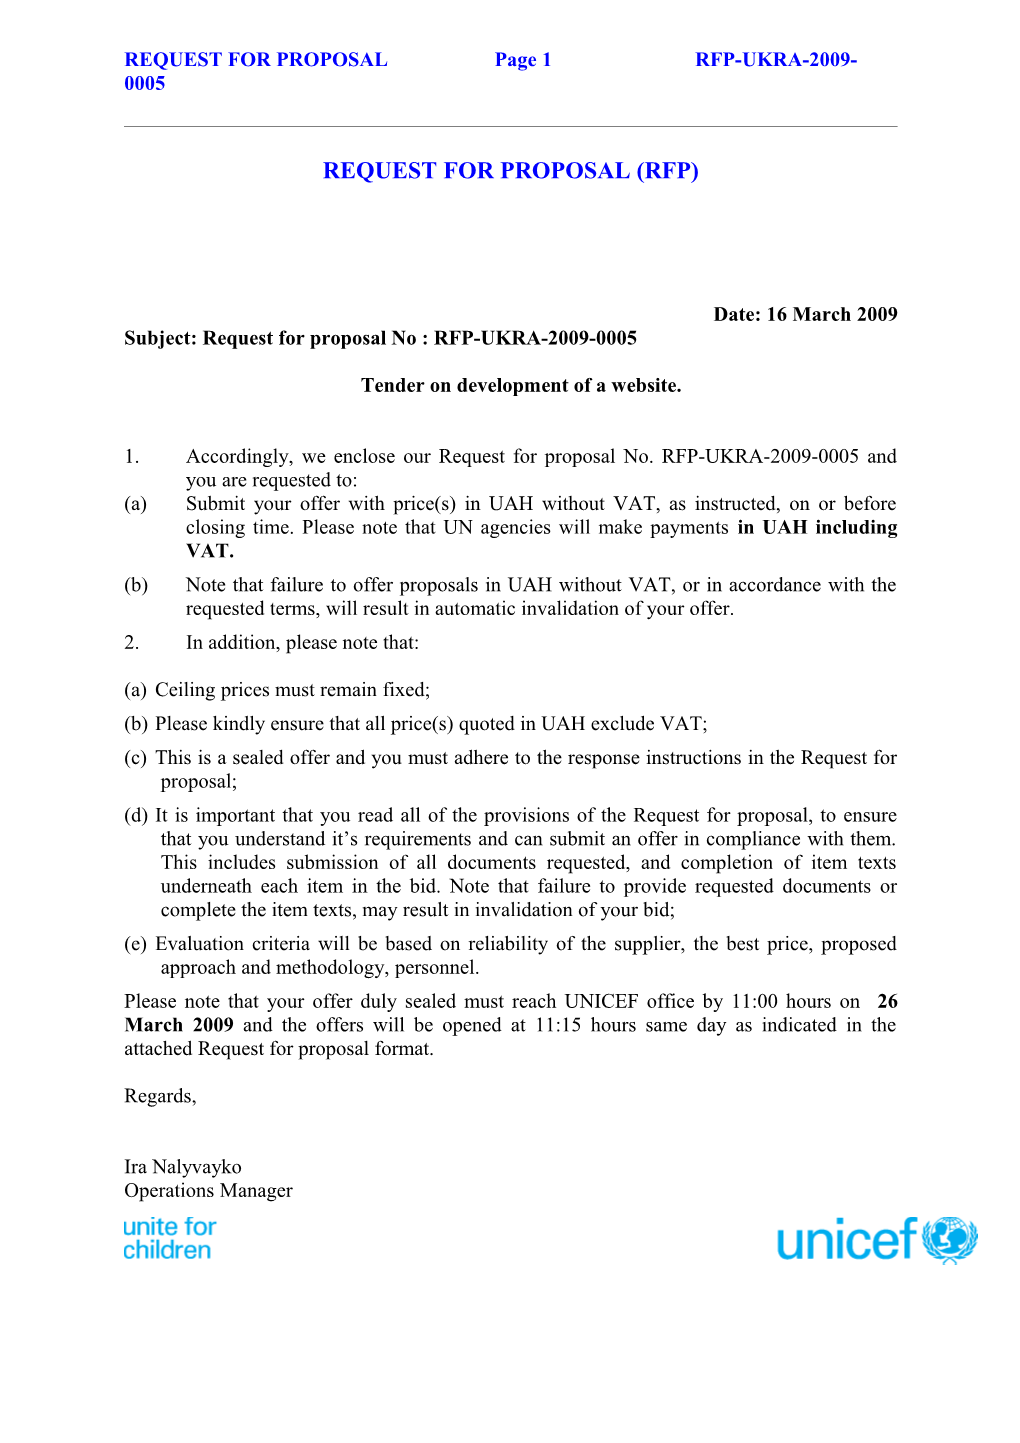 REQUEST for Proposalpage 1 RFP-UKRA-2009-0005